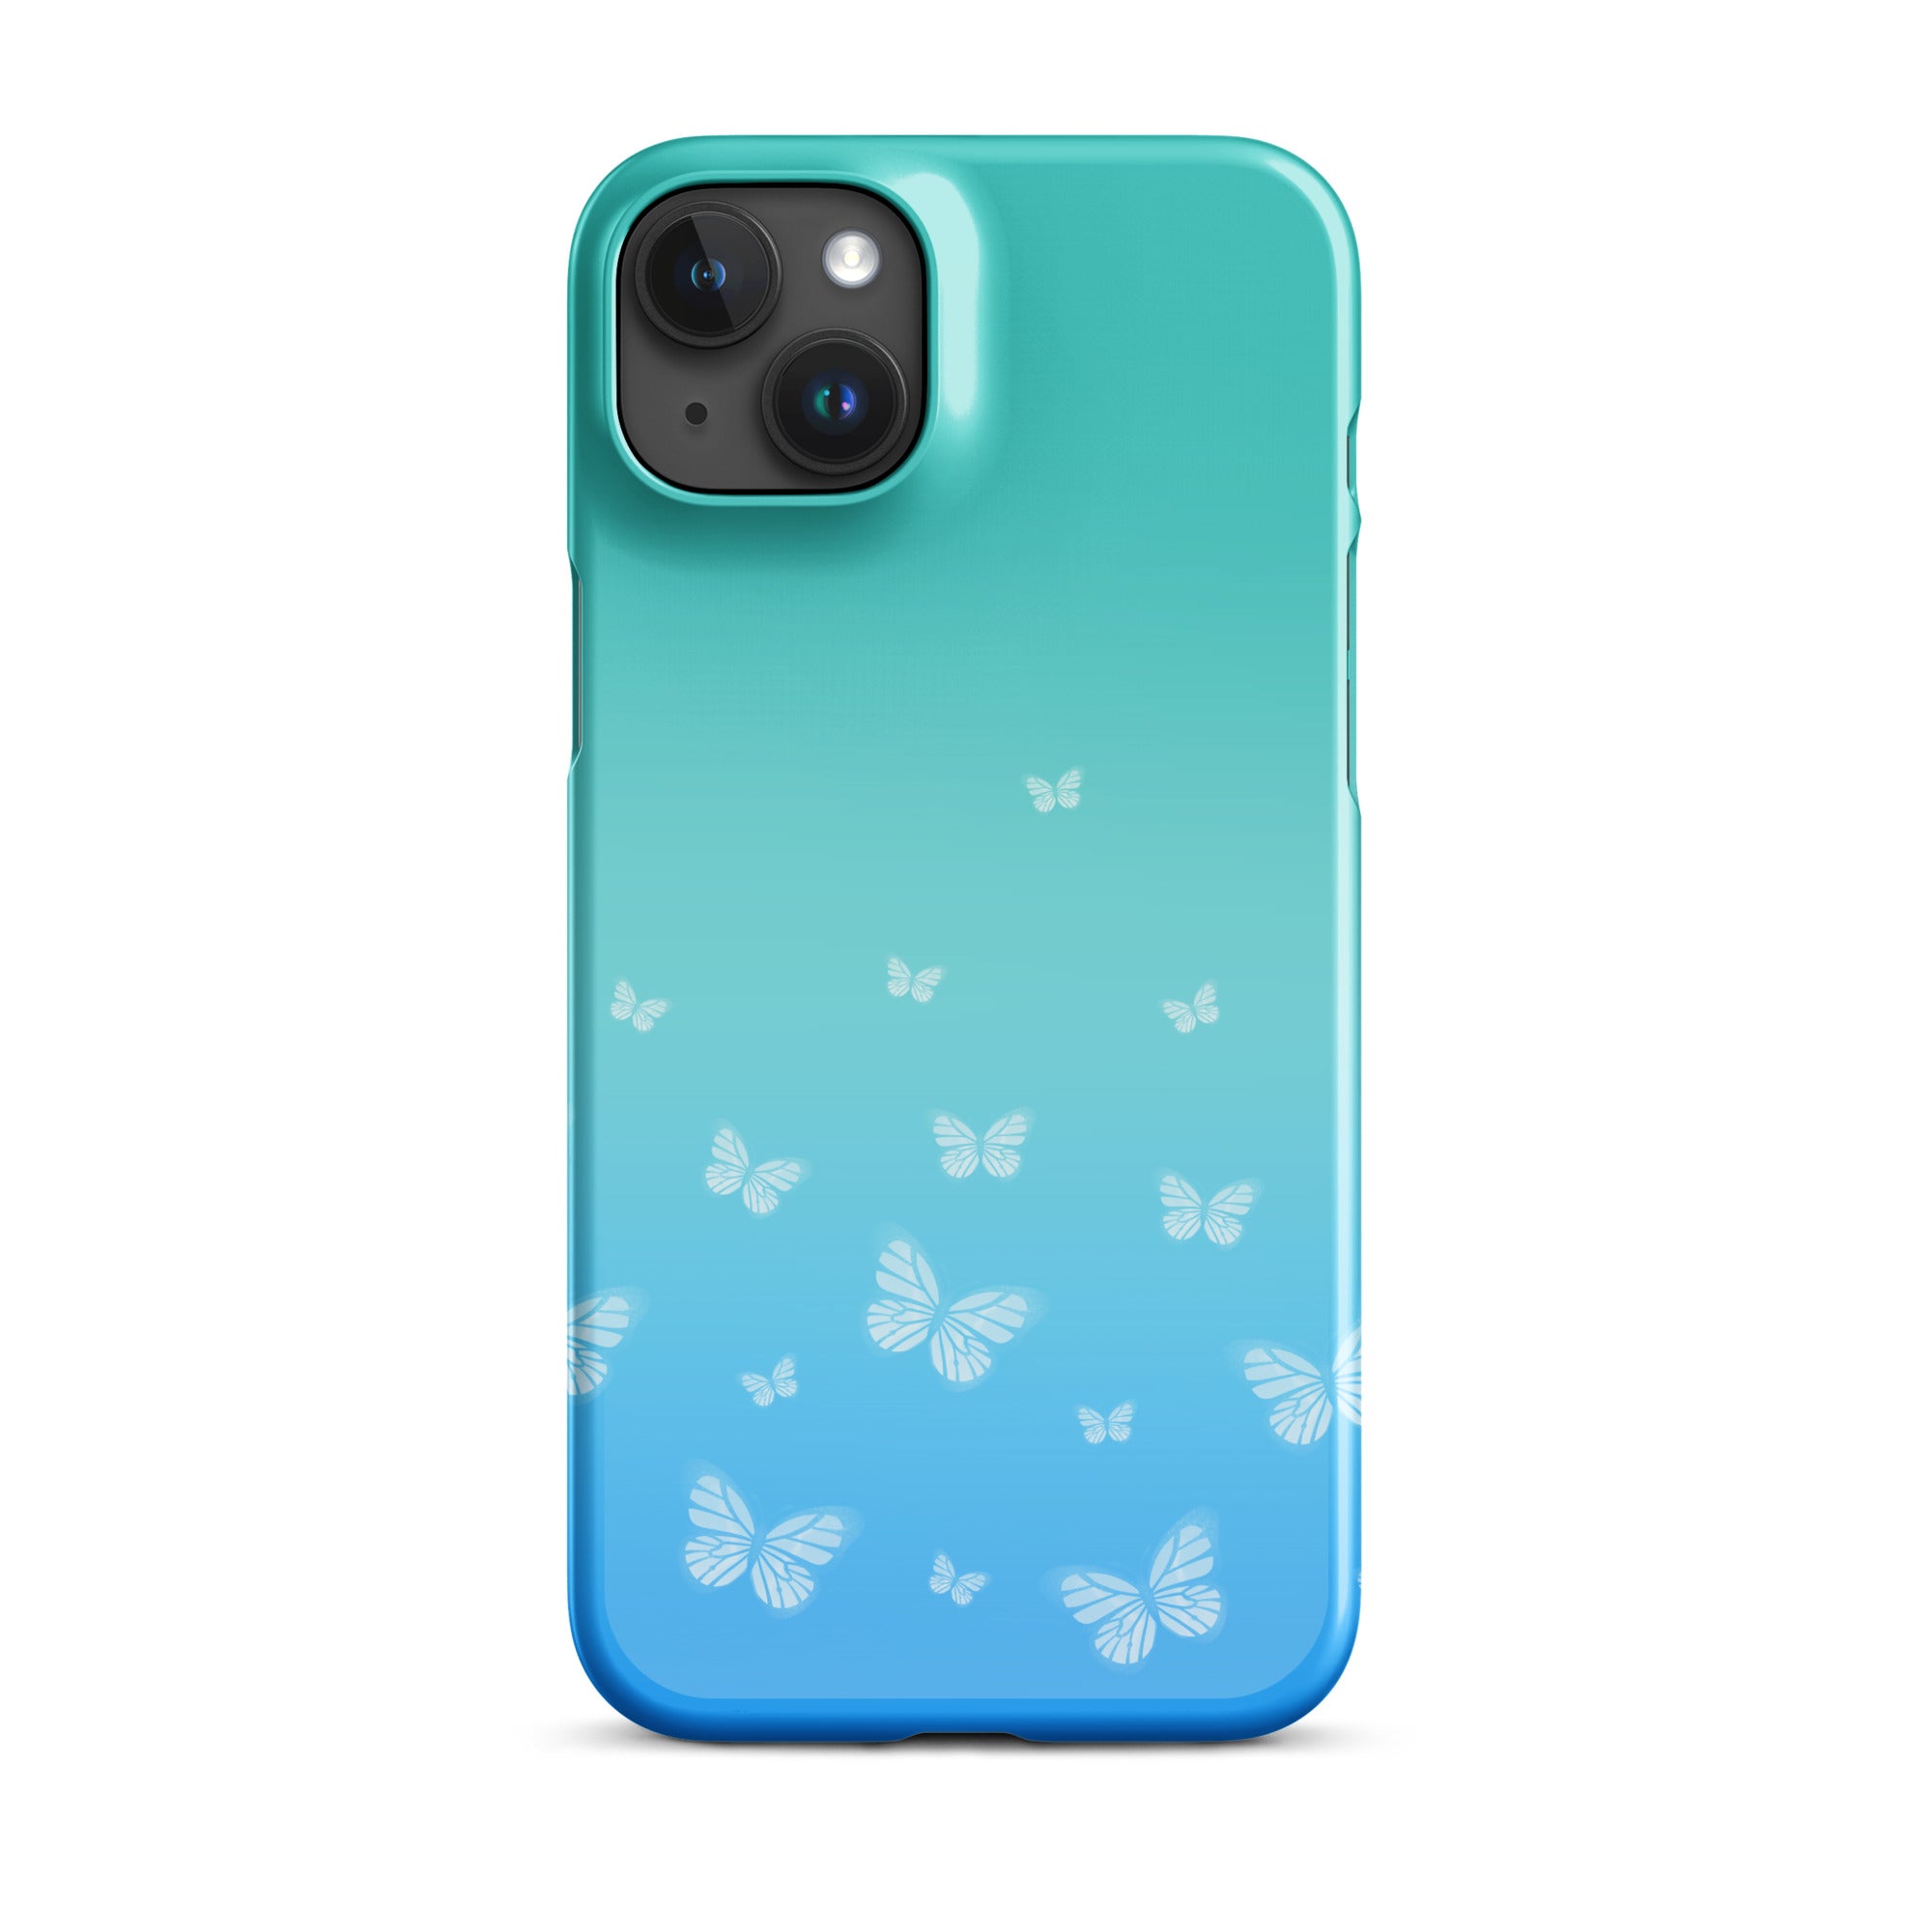 Debut Snap case for iPhone®